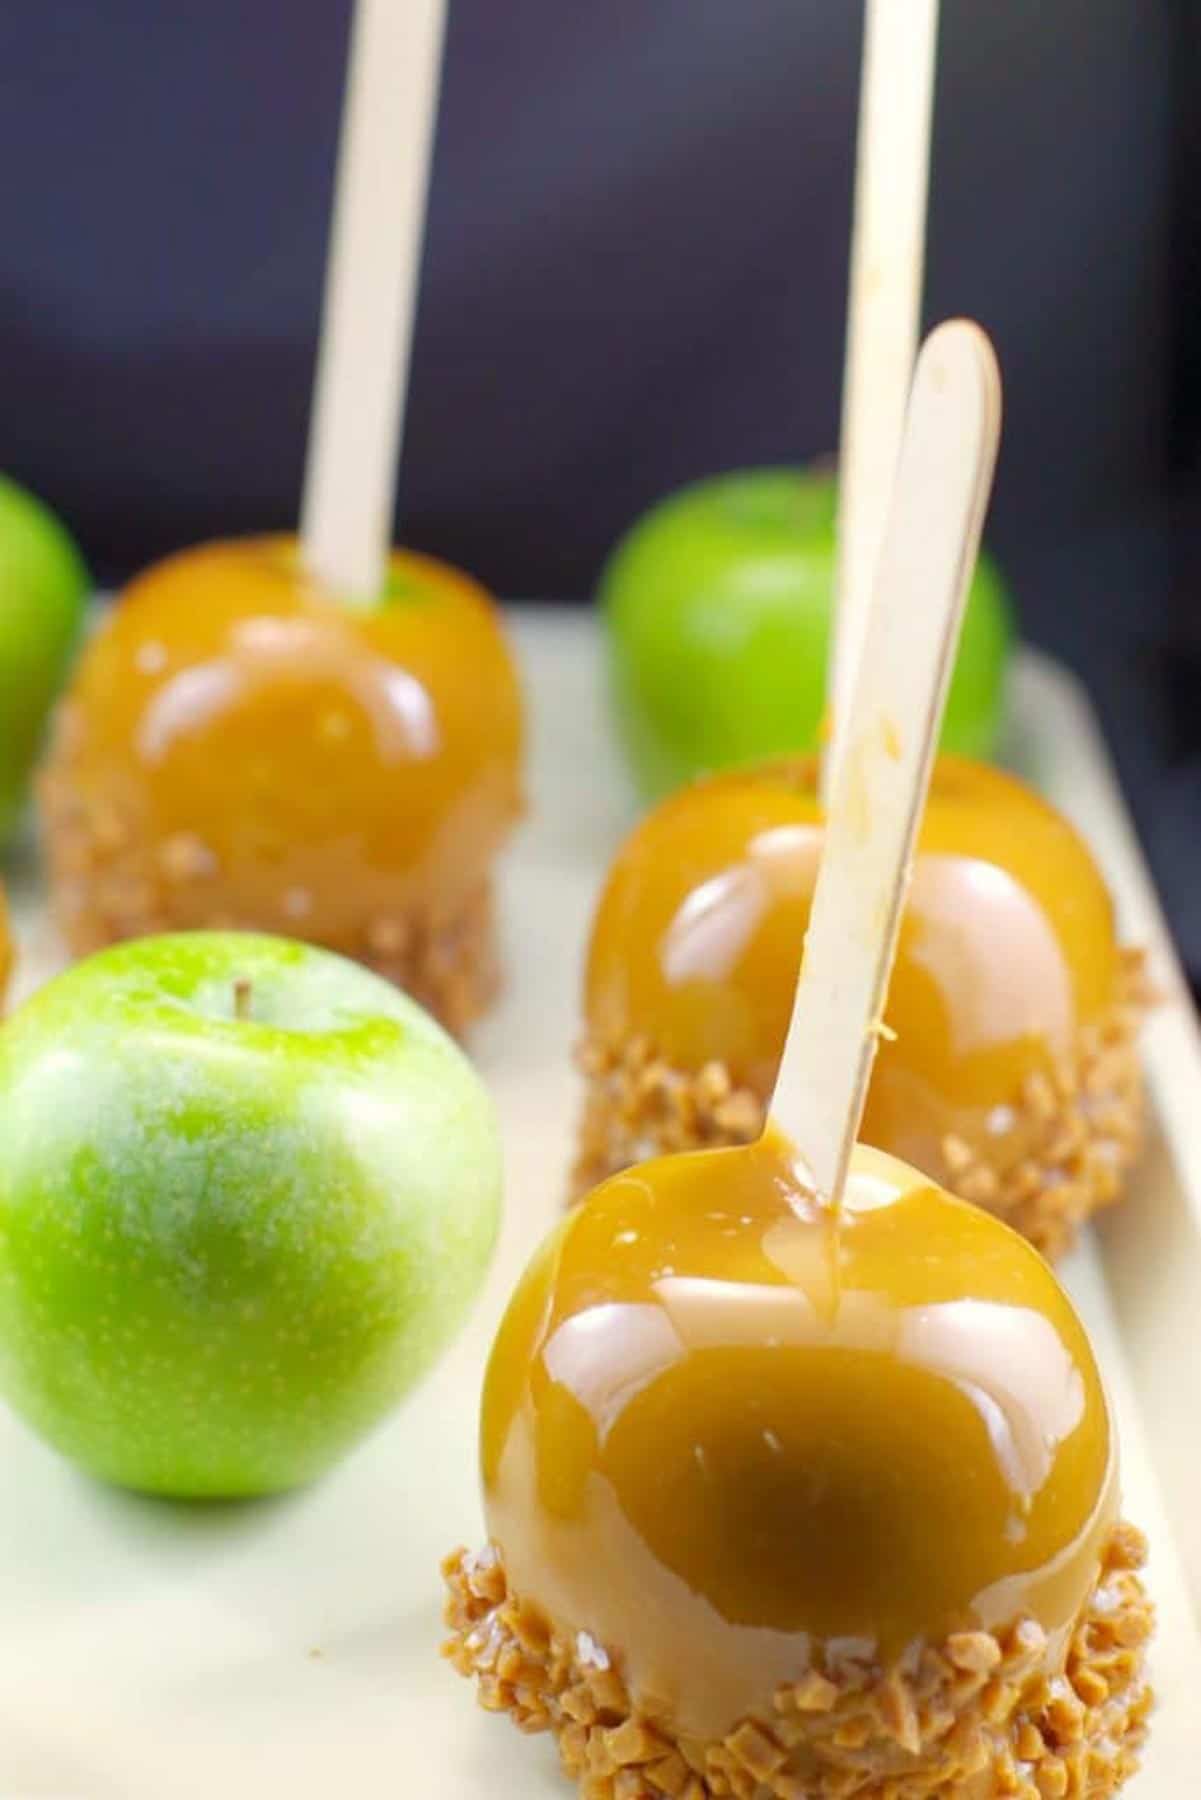 green and caramel apples on a beige tray